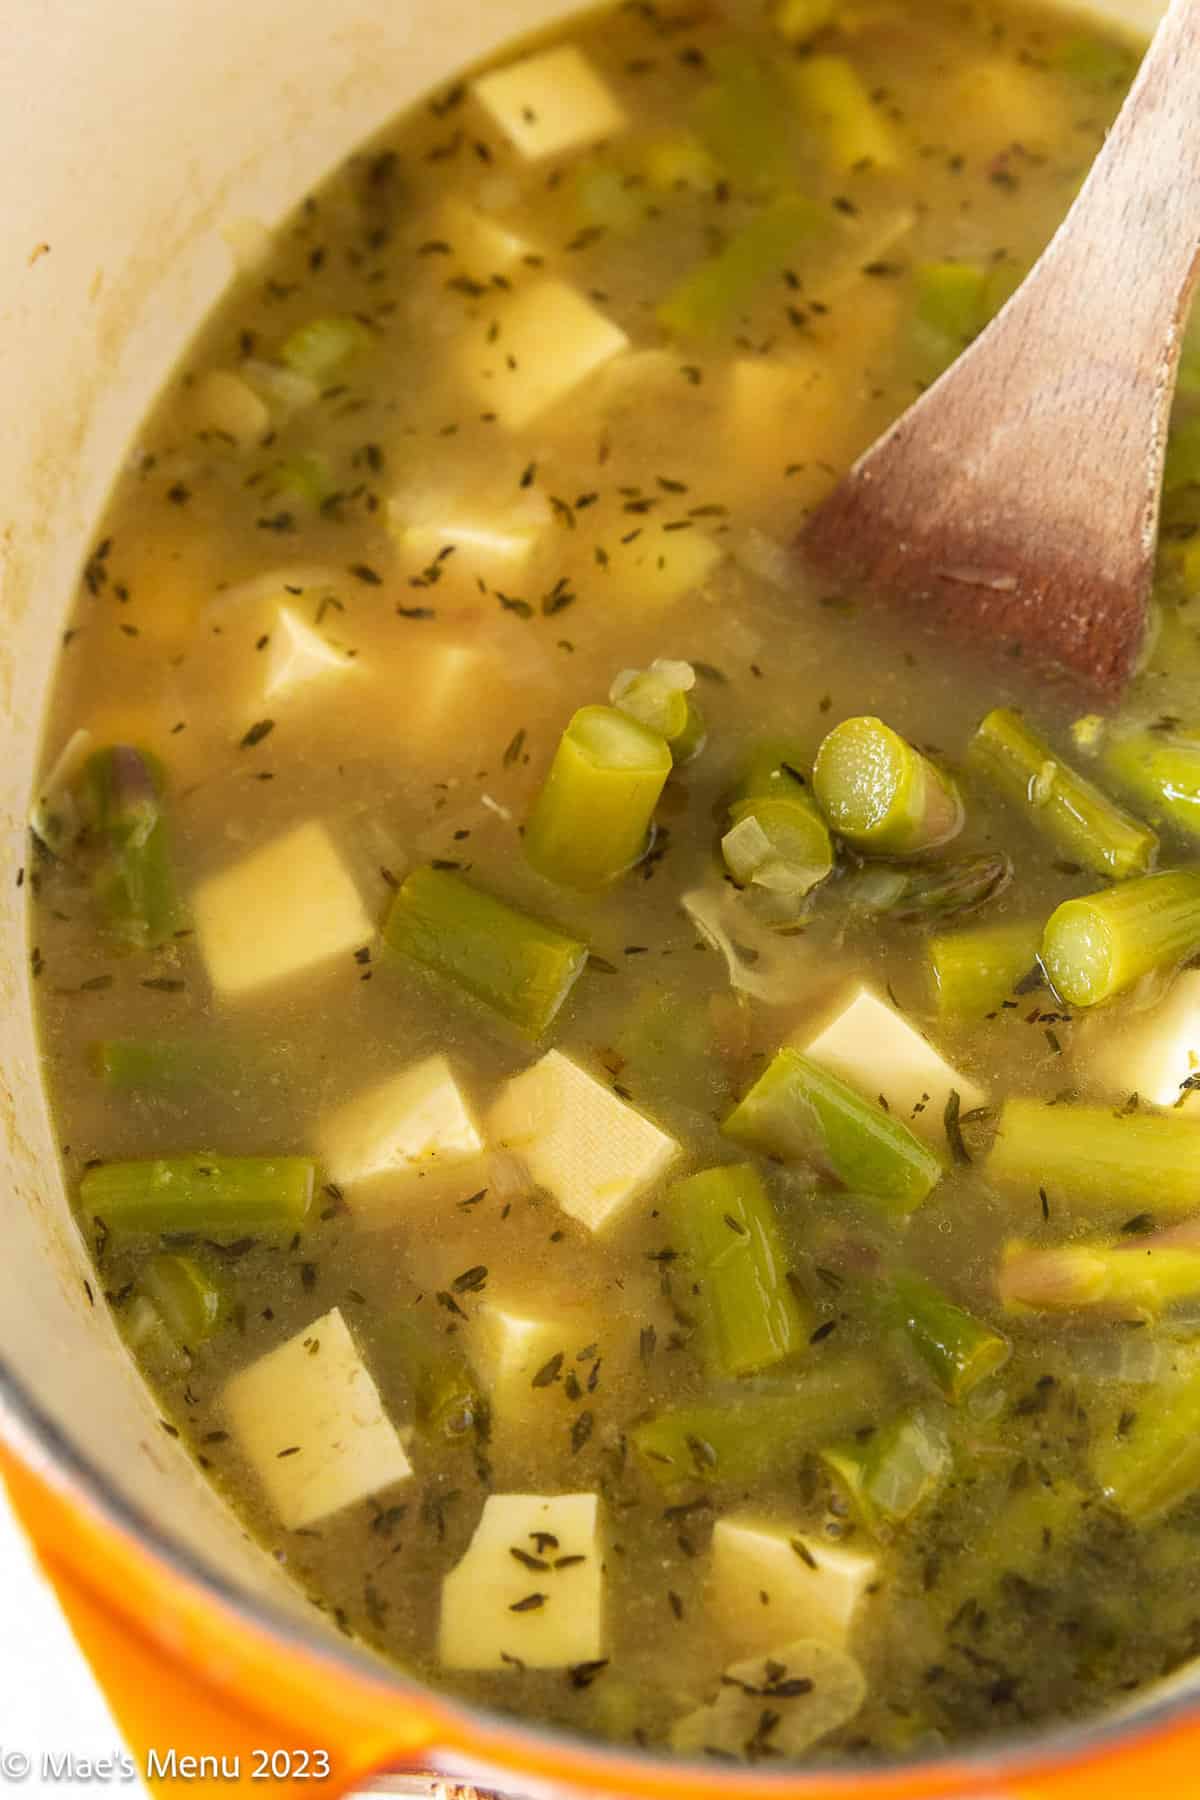 A large pot of simmered asparagus and tofu in the broth.